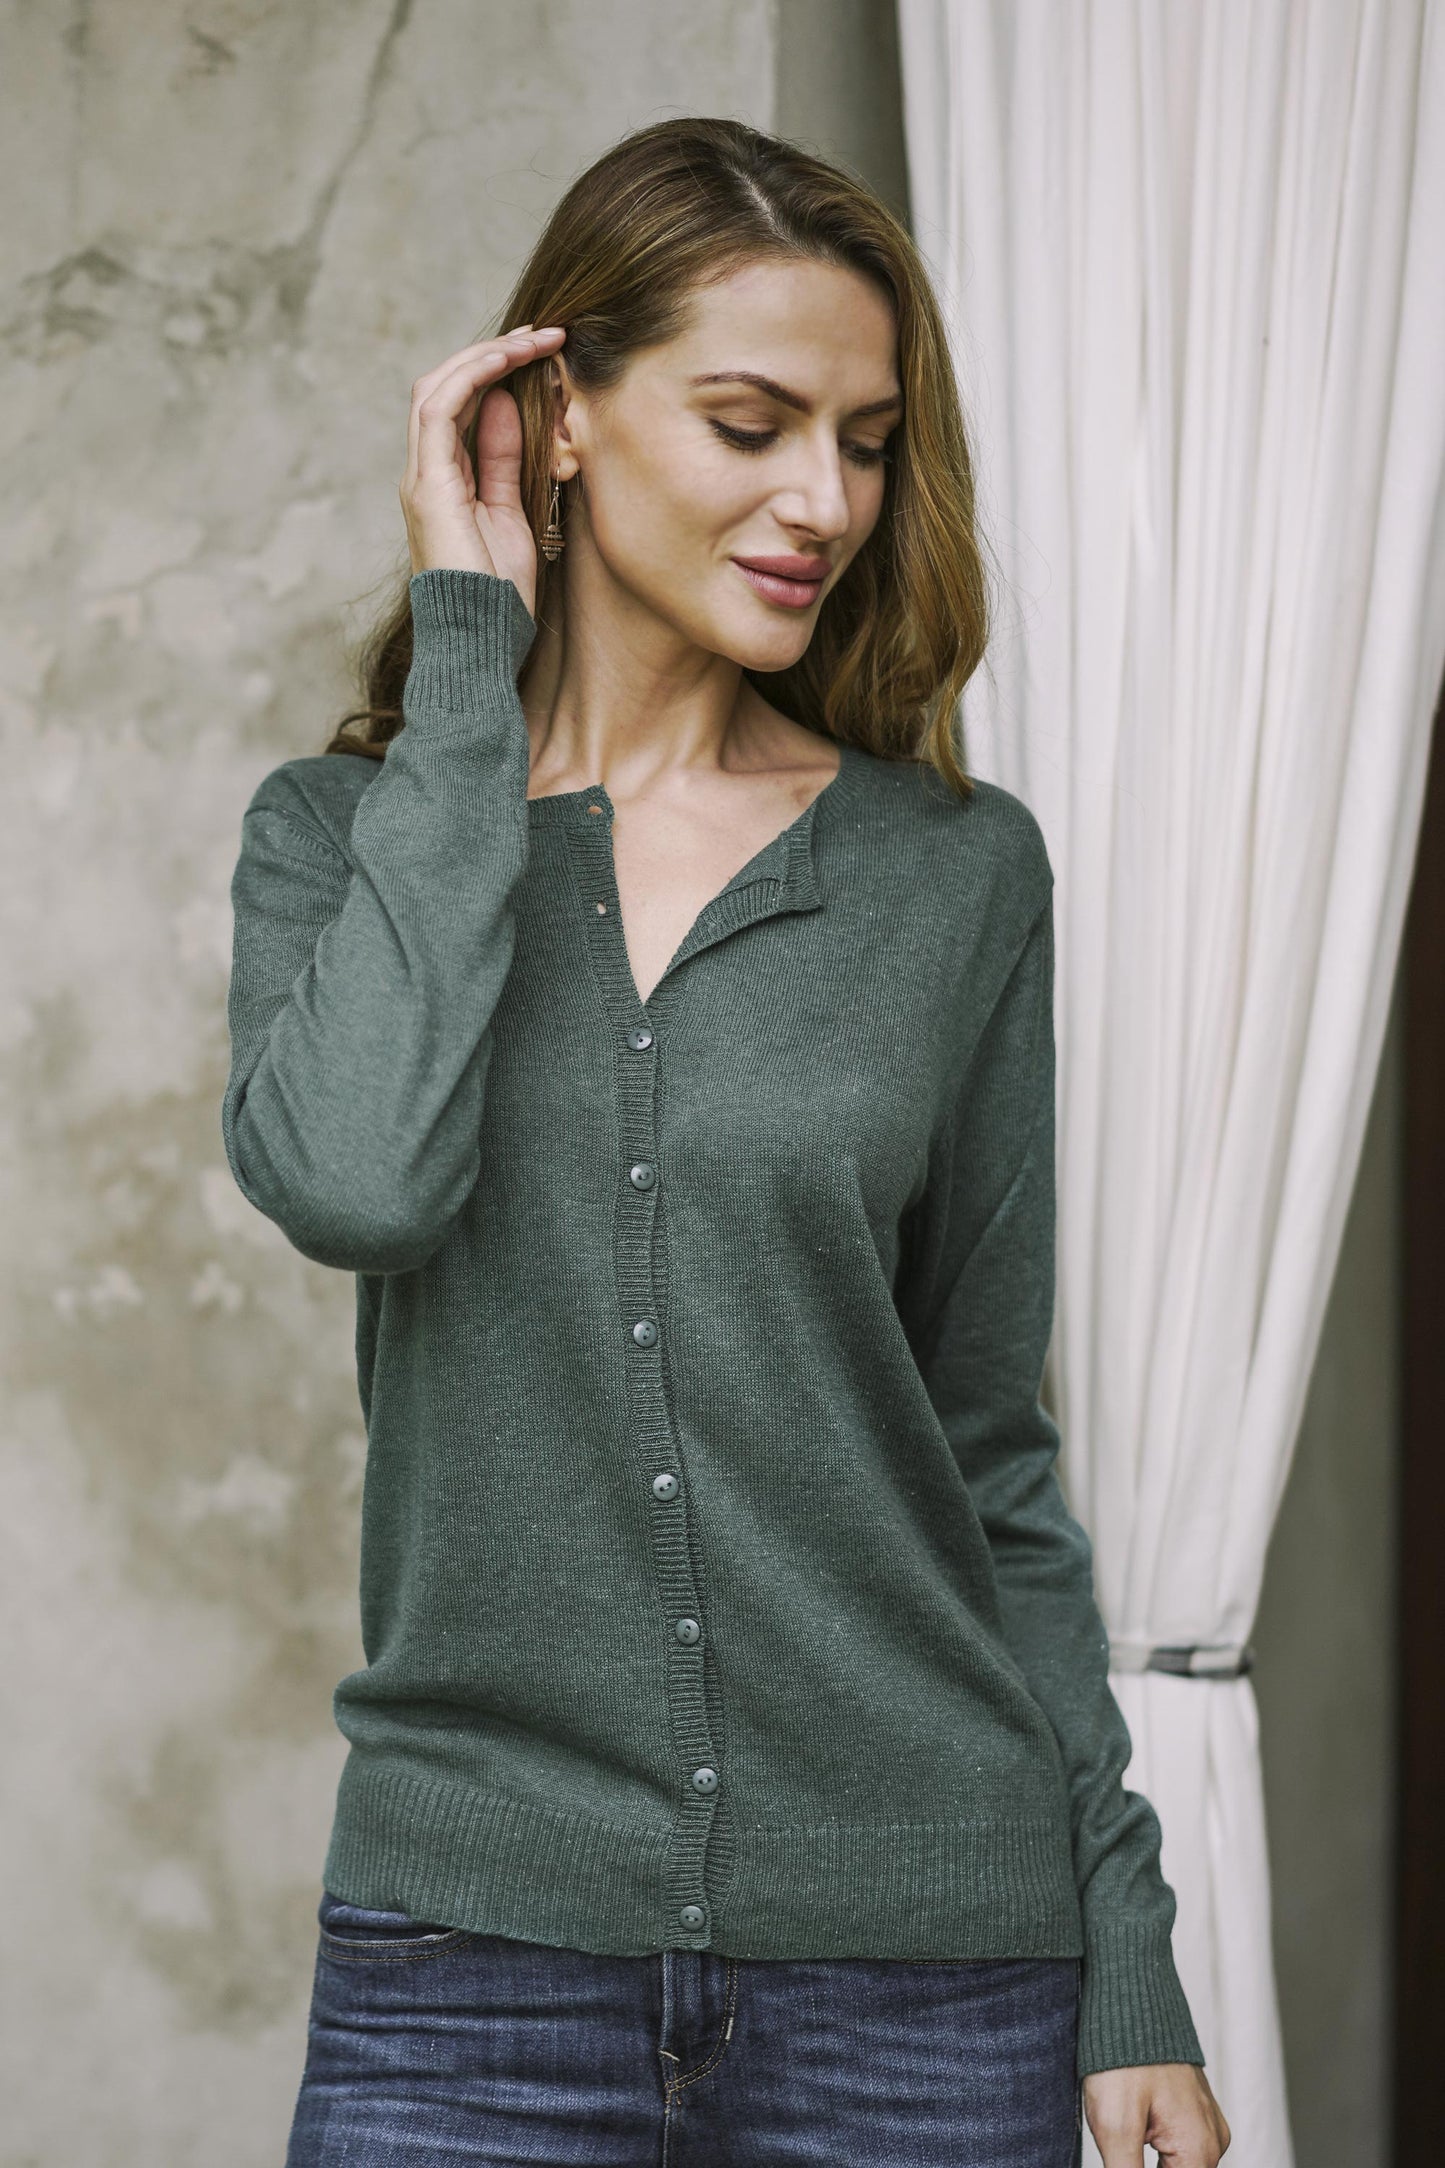 Simple Style in Viridian Cotton Blend Green Cardigan Sweater from Peru